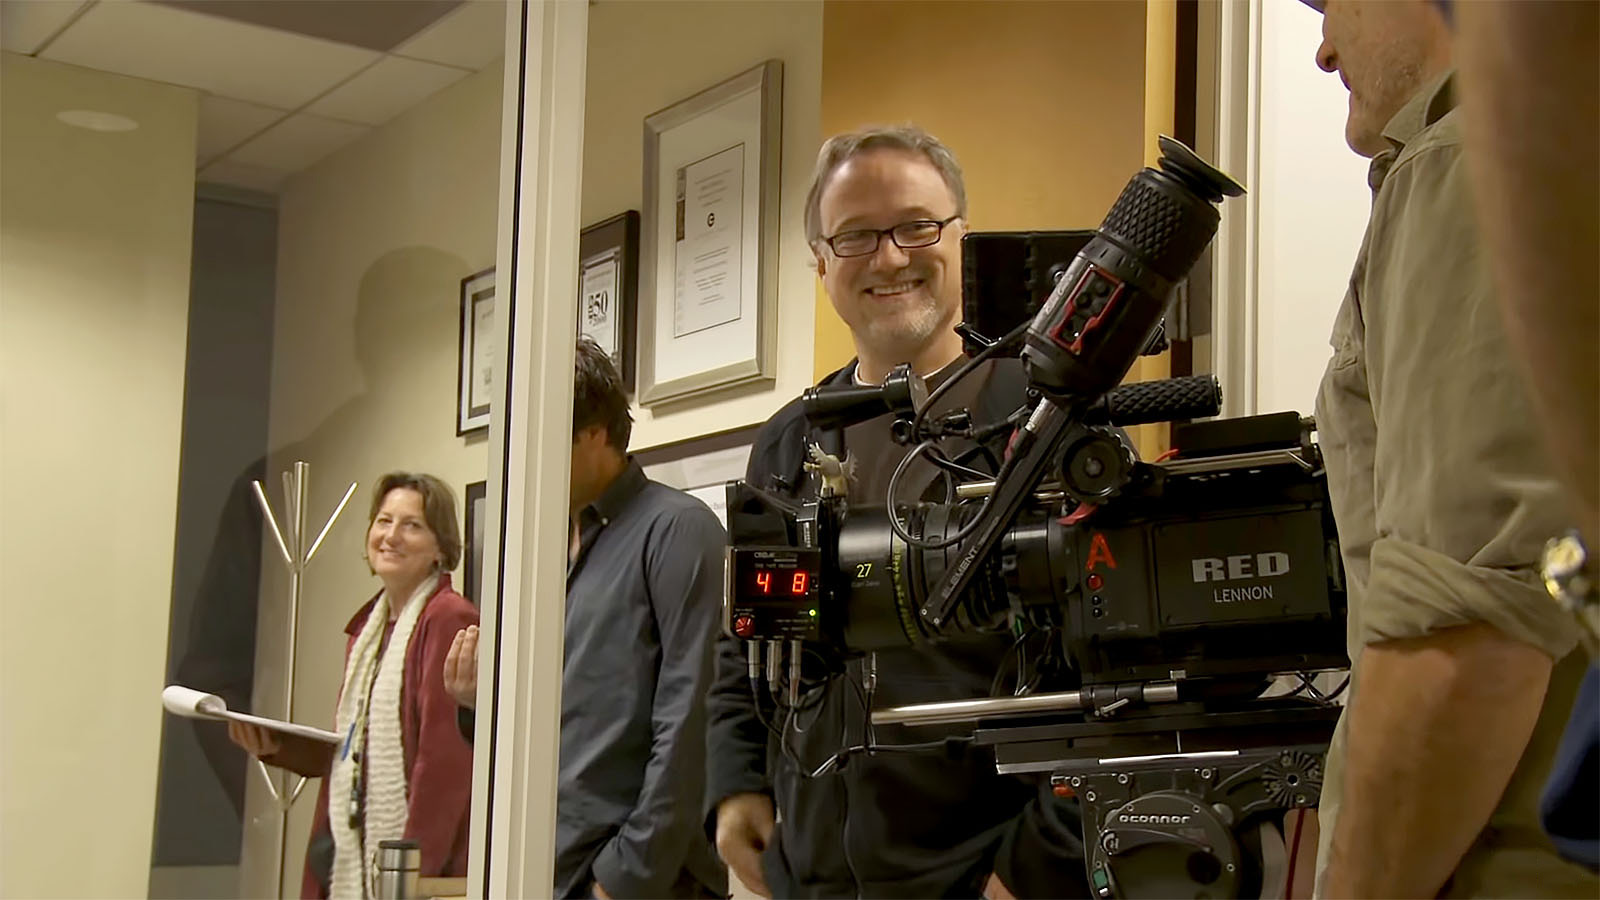 David Fincher and the RED ONE camera on location for The Social Network. Image © Columbia Pictures